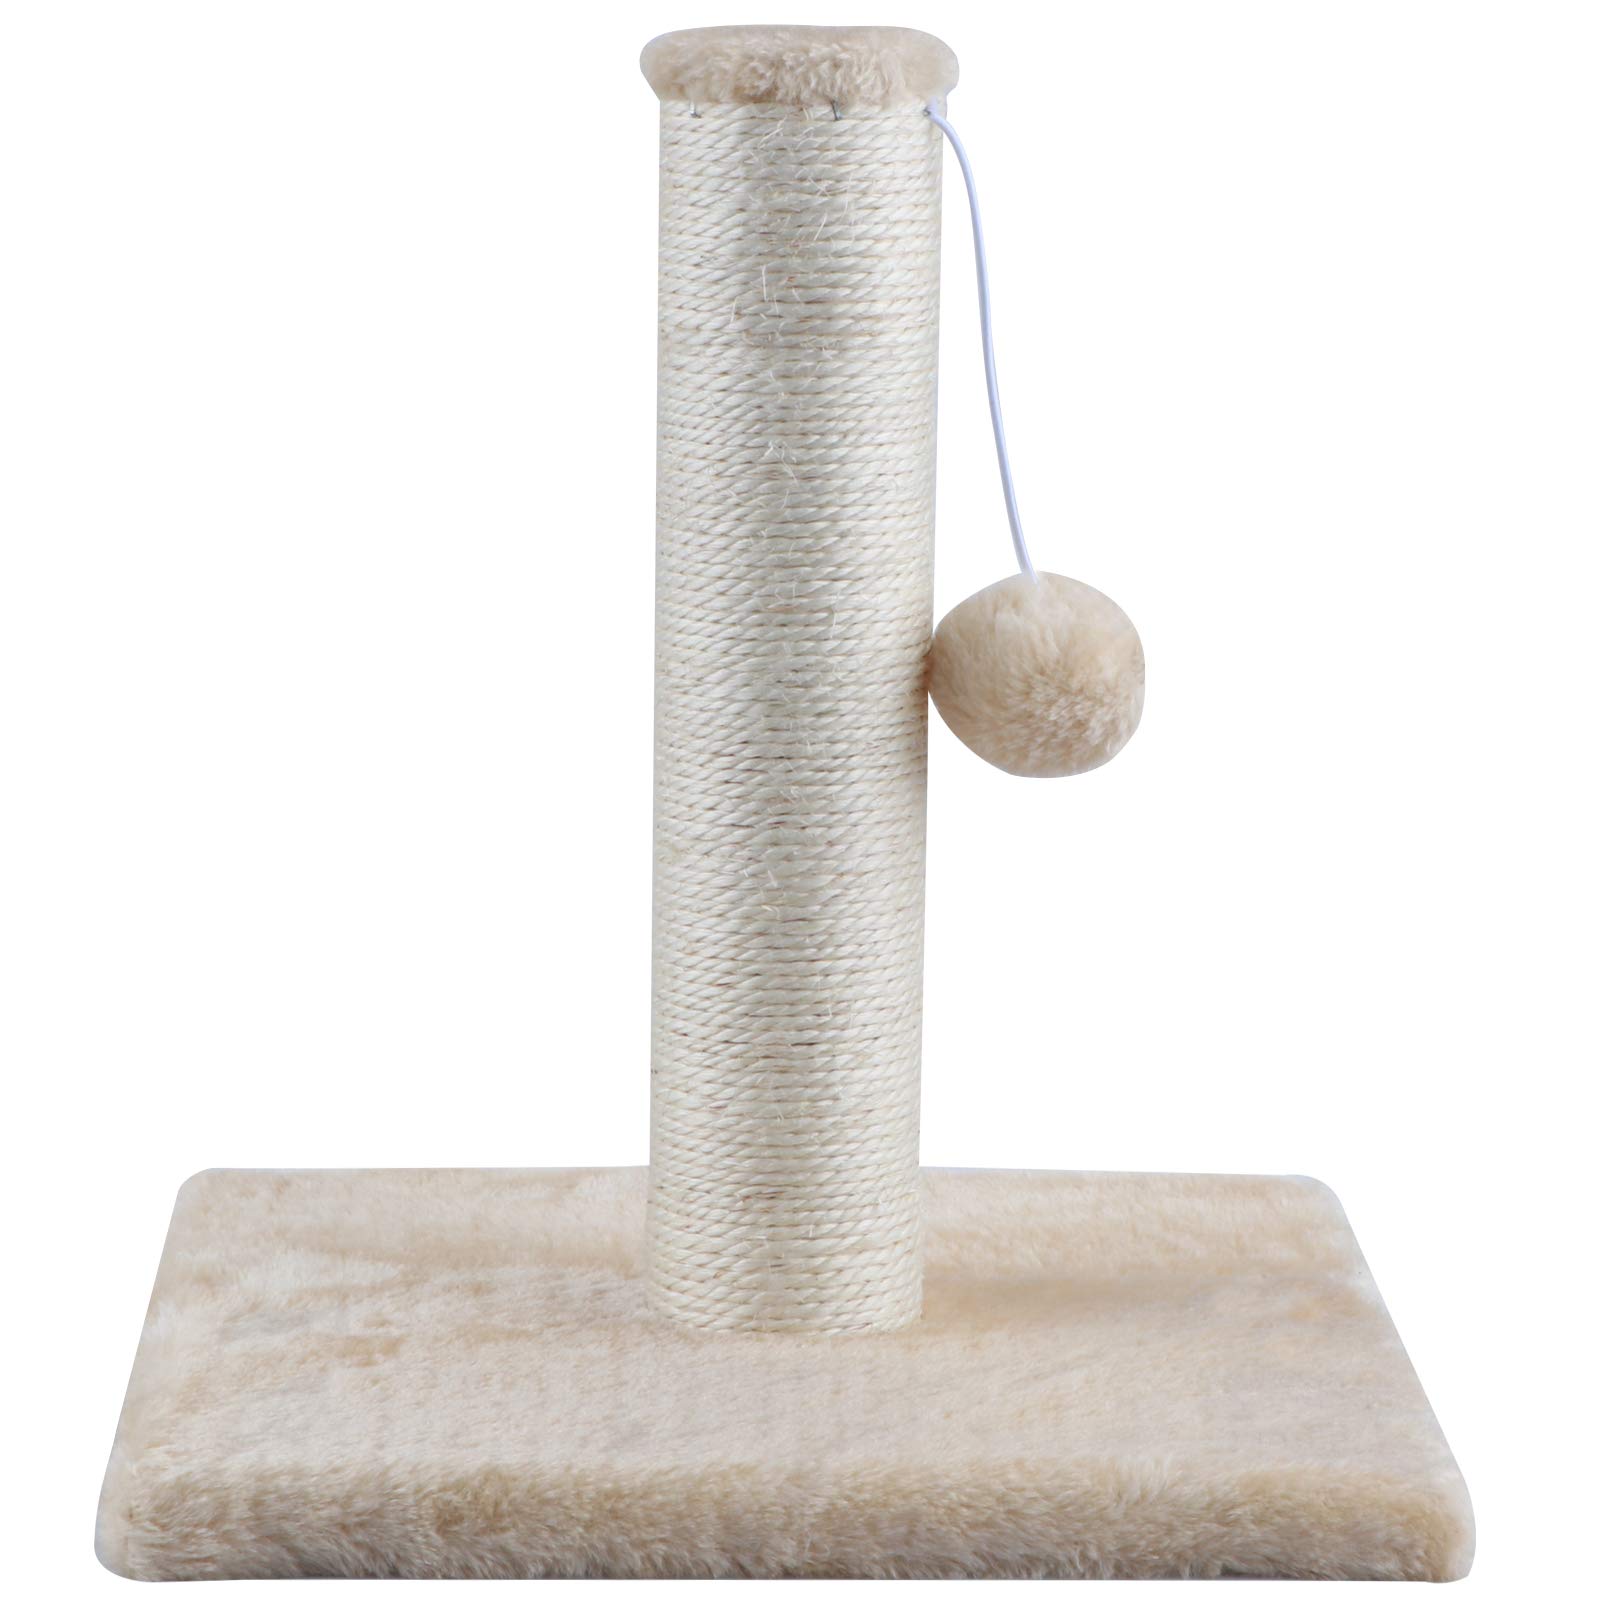 XinKunmarine Cat Scratching Posts and Small Cat Trees